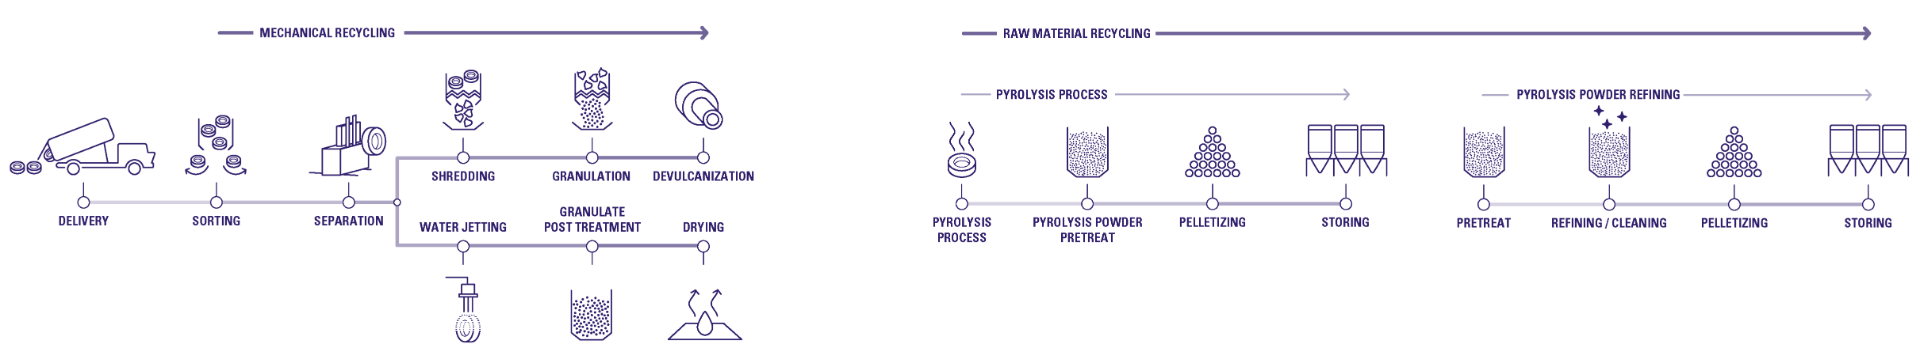 Zeppelin Systems_Tire Recycling Process.png